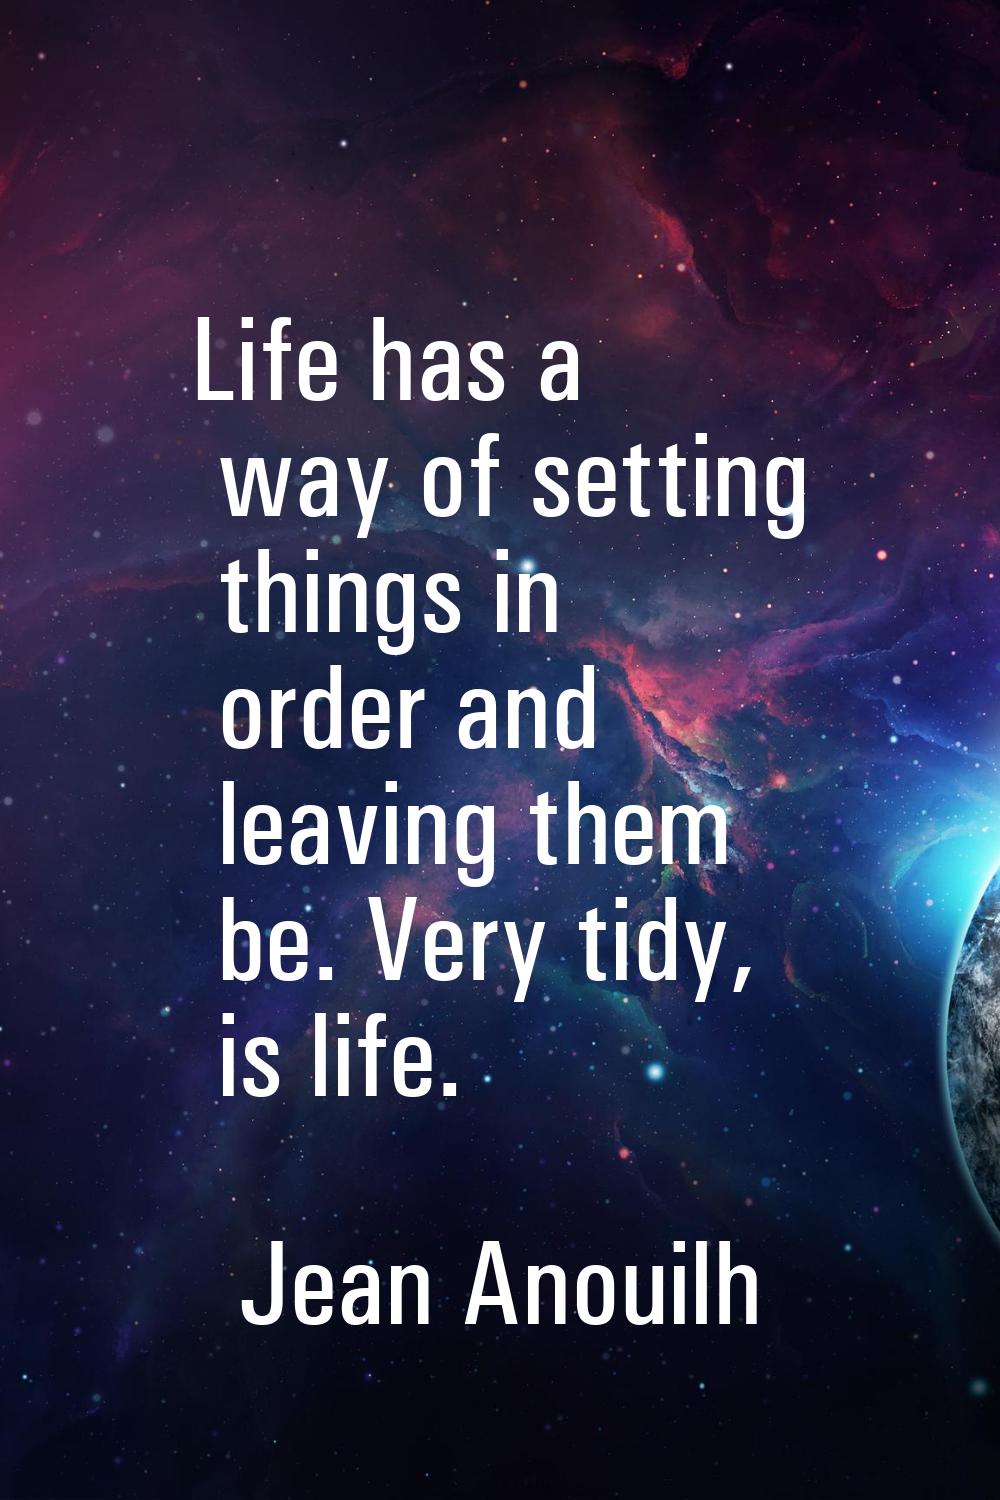 Life has a way of setting things in order and leaving them be. Very tidy, is life.